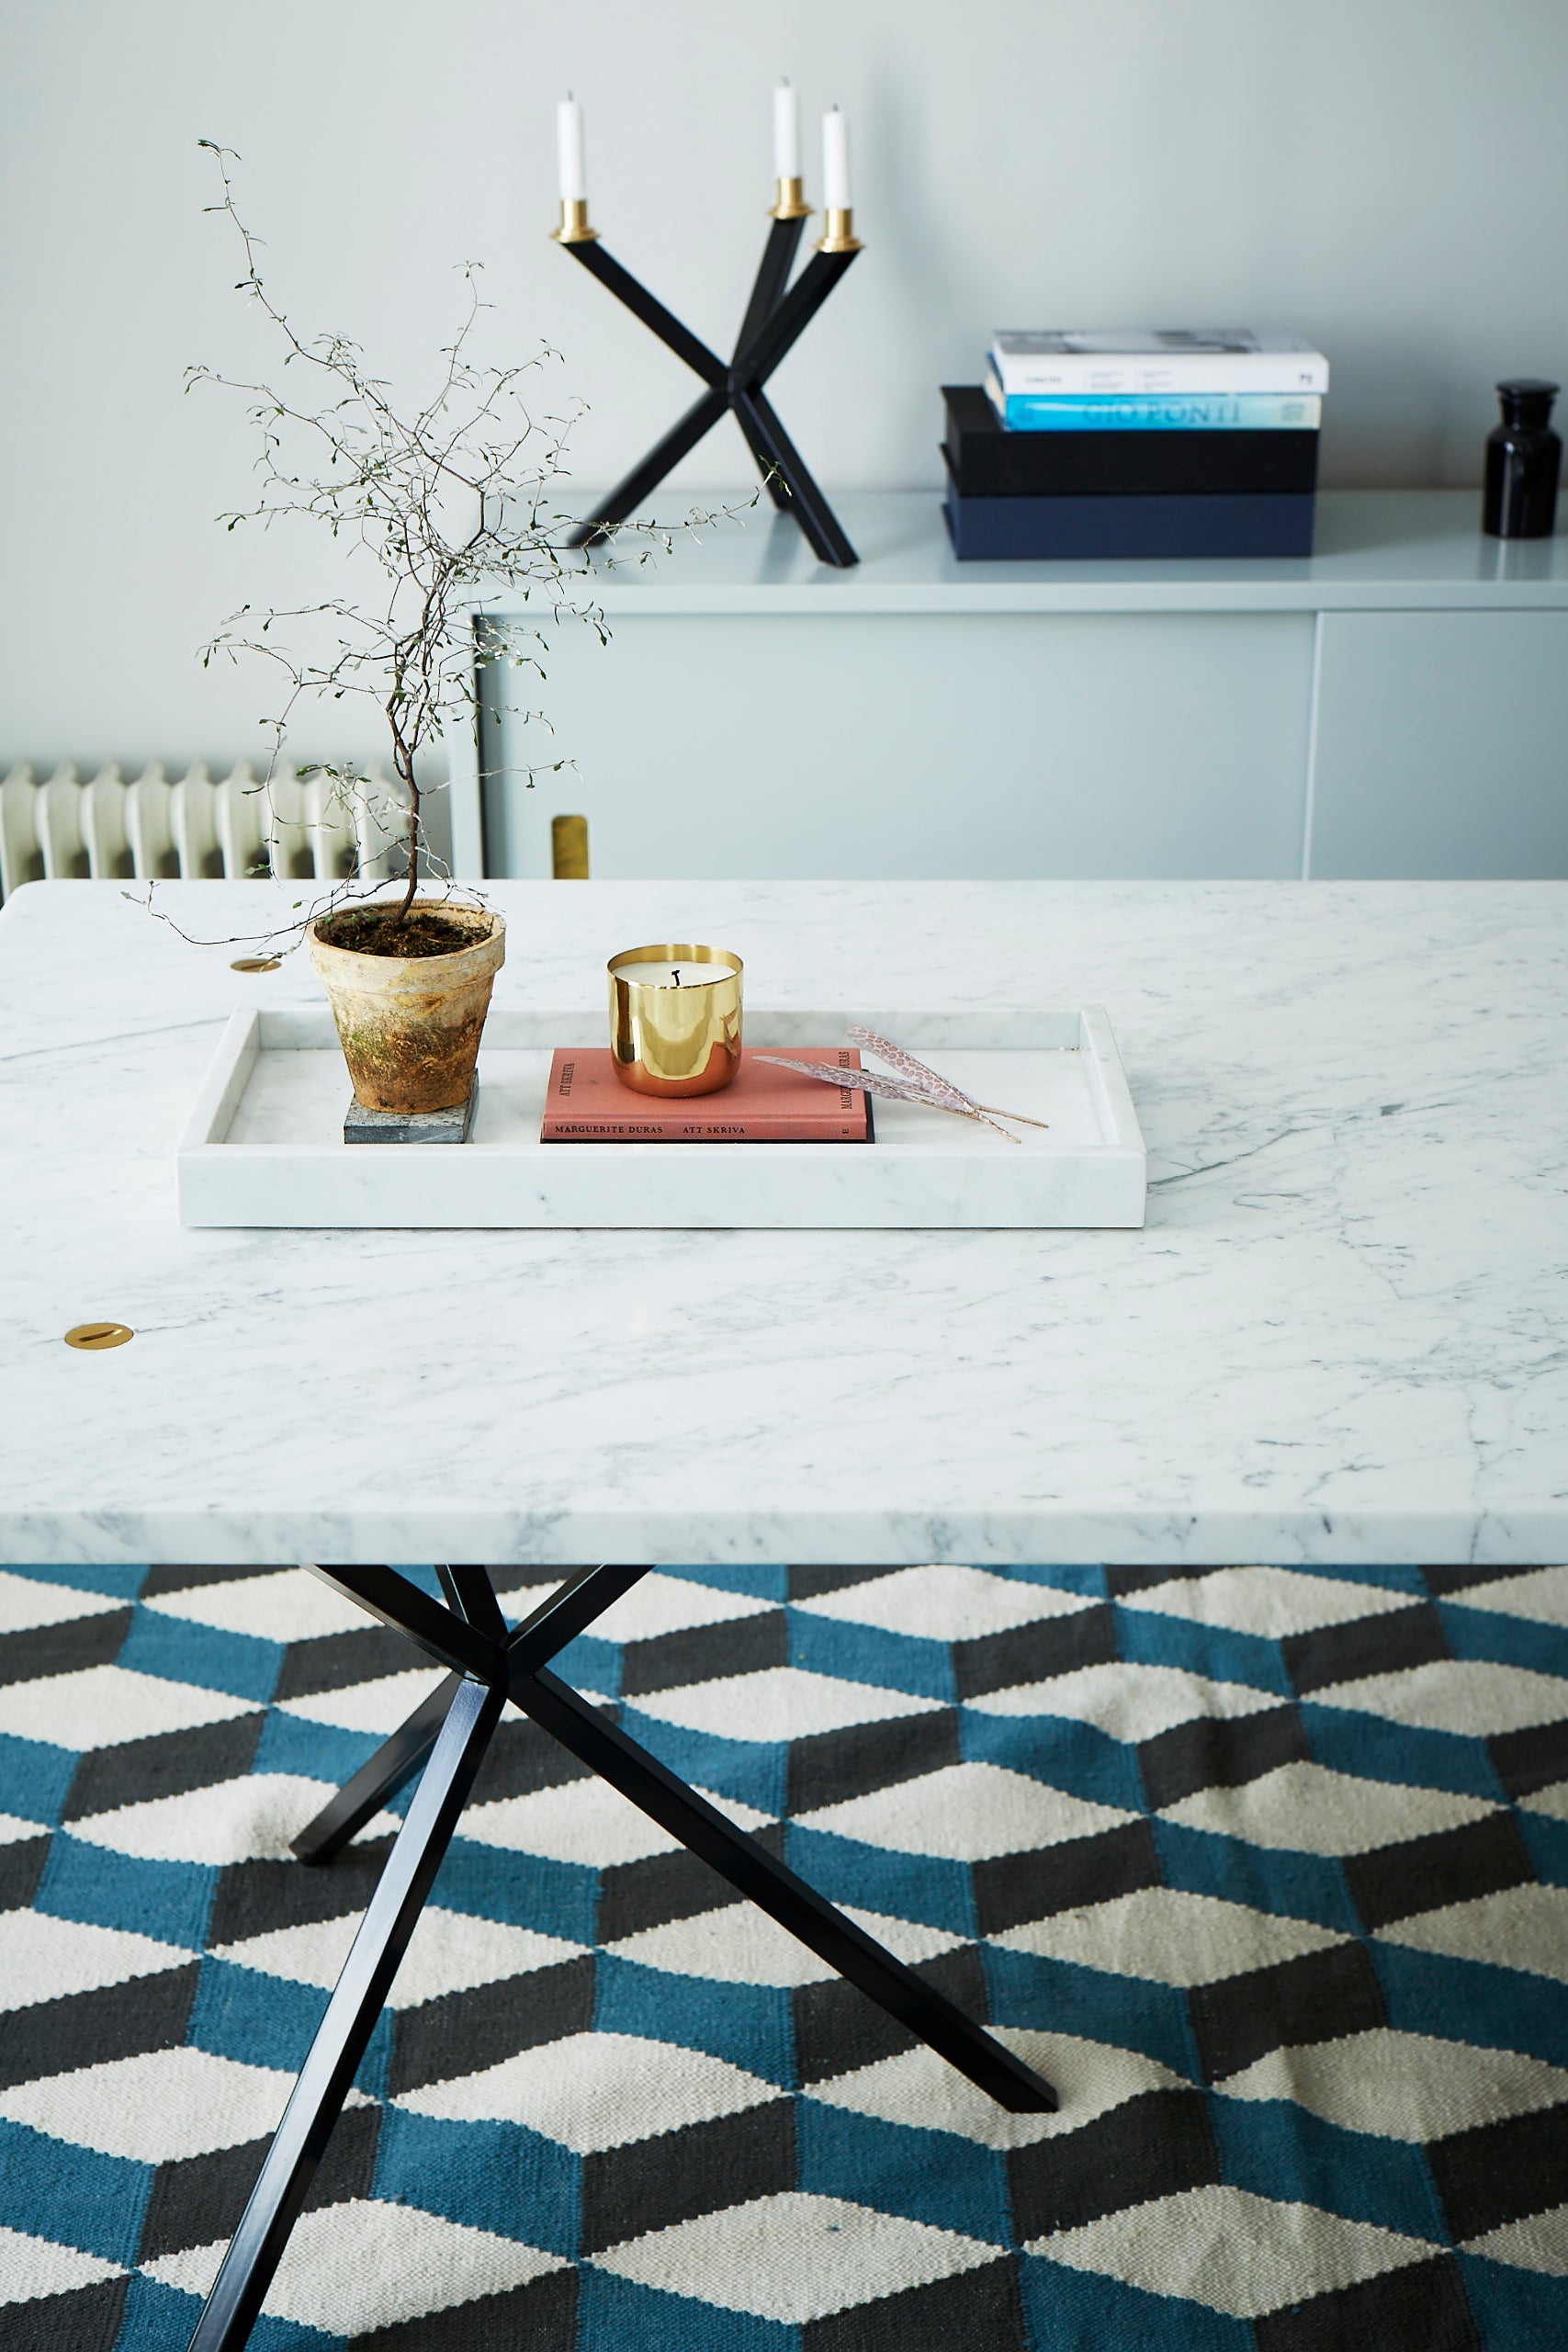 NEB Rectangular Table With Top In Carrara Marble